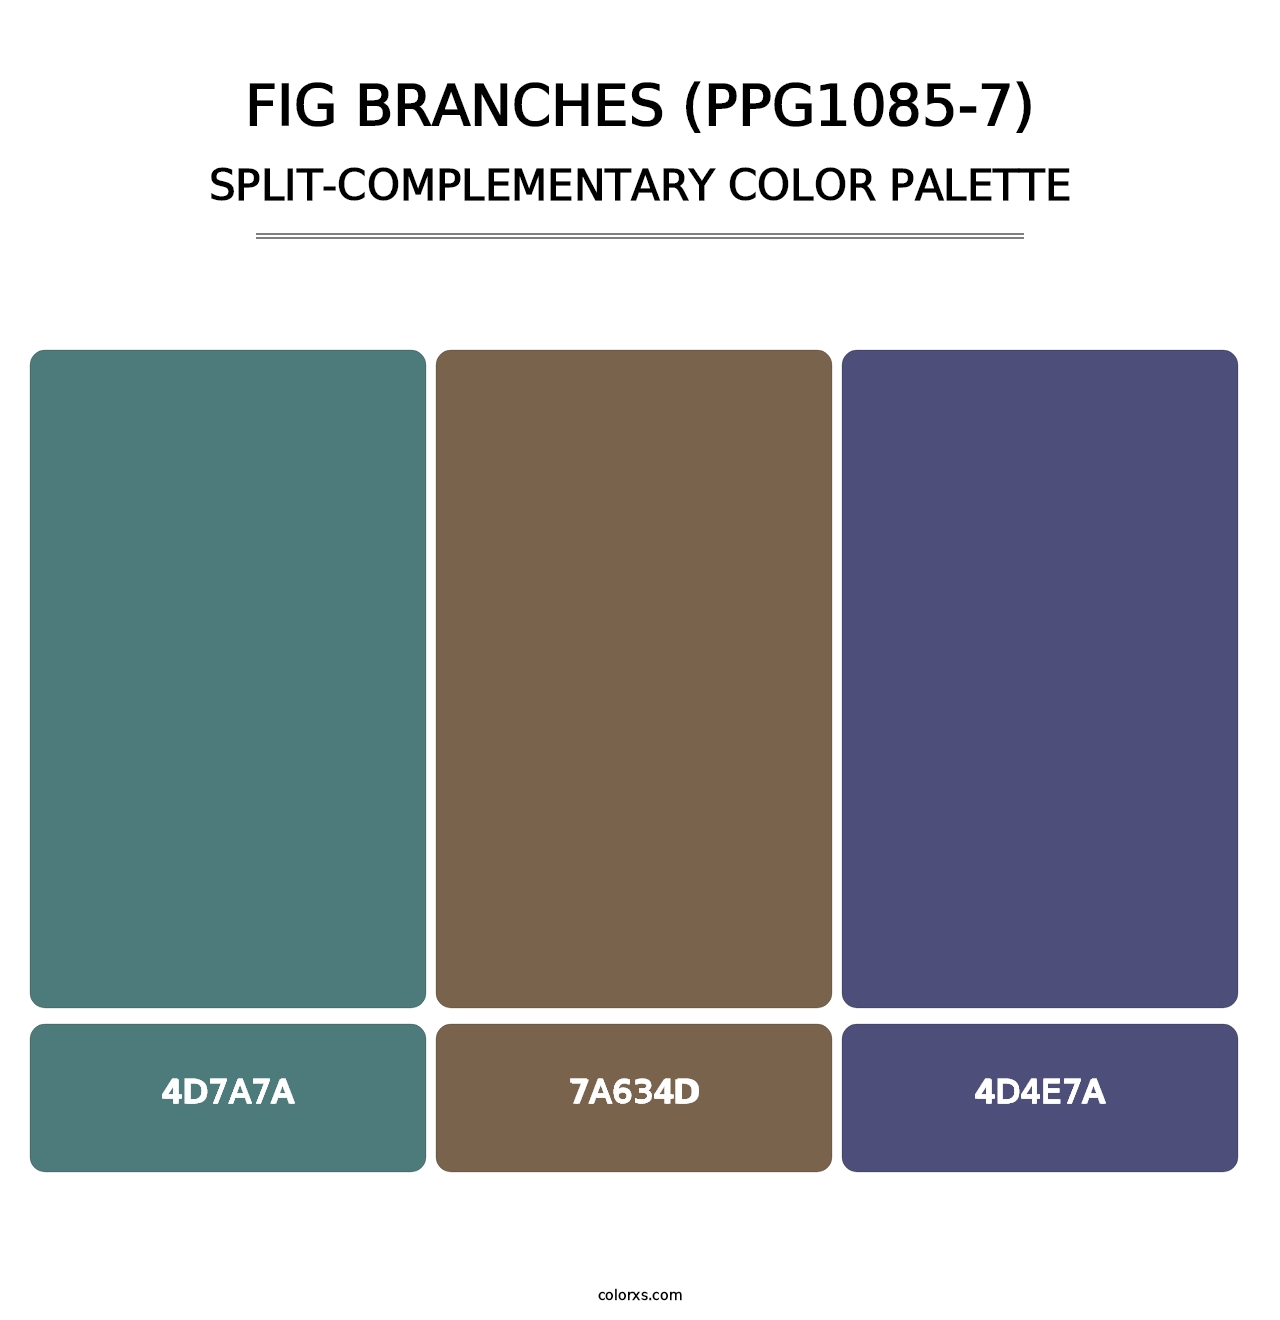 Fig Branches (PPG1085-7) - Split-Complementary Color Palette